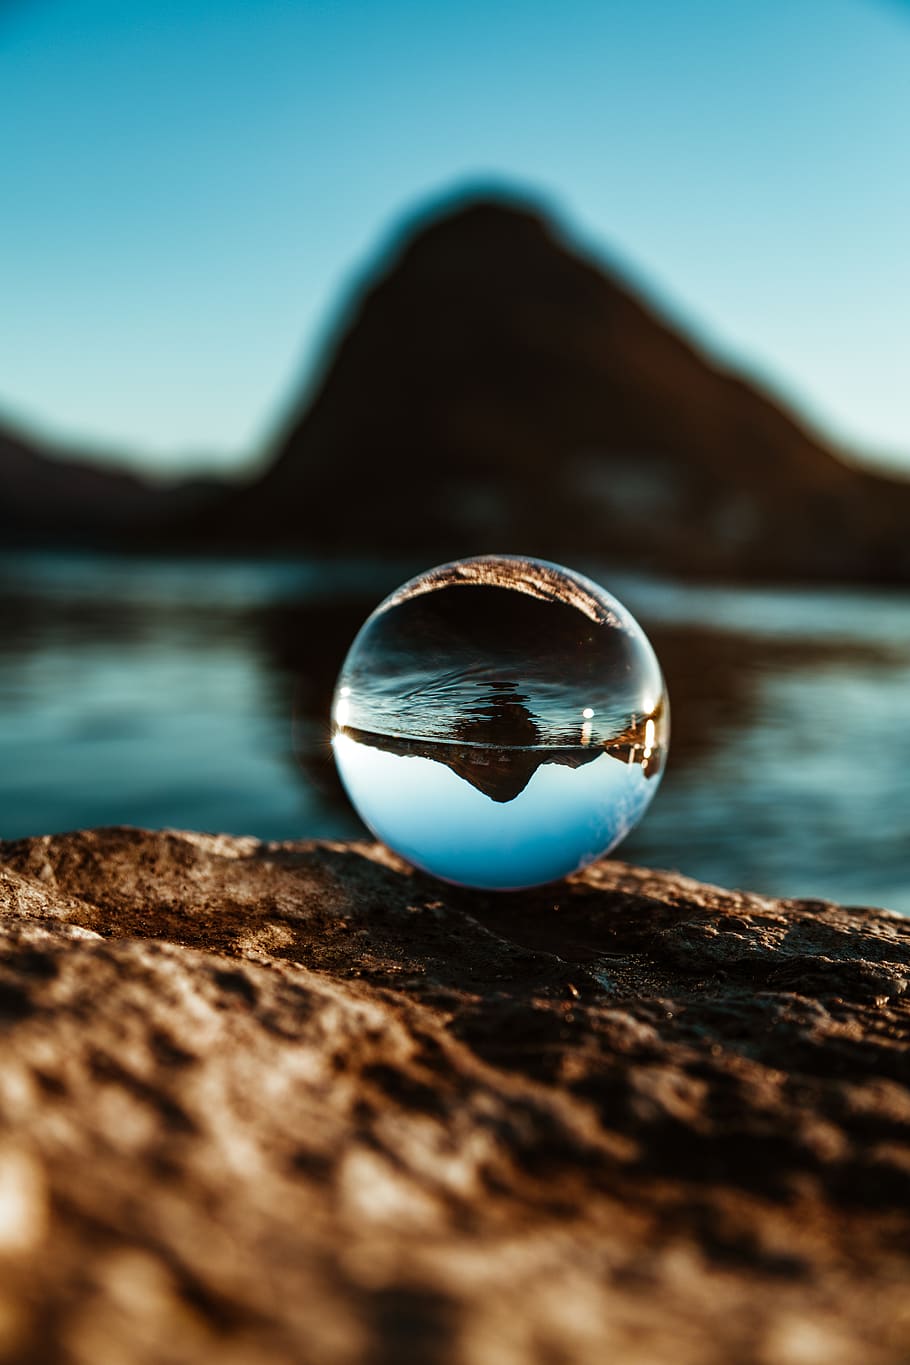 Close-Up Photo of Crystal Ball, blur, depth of field, focus, glass